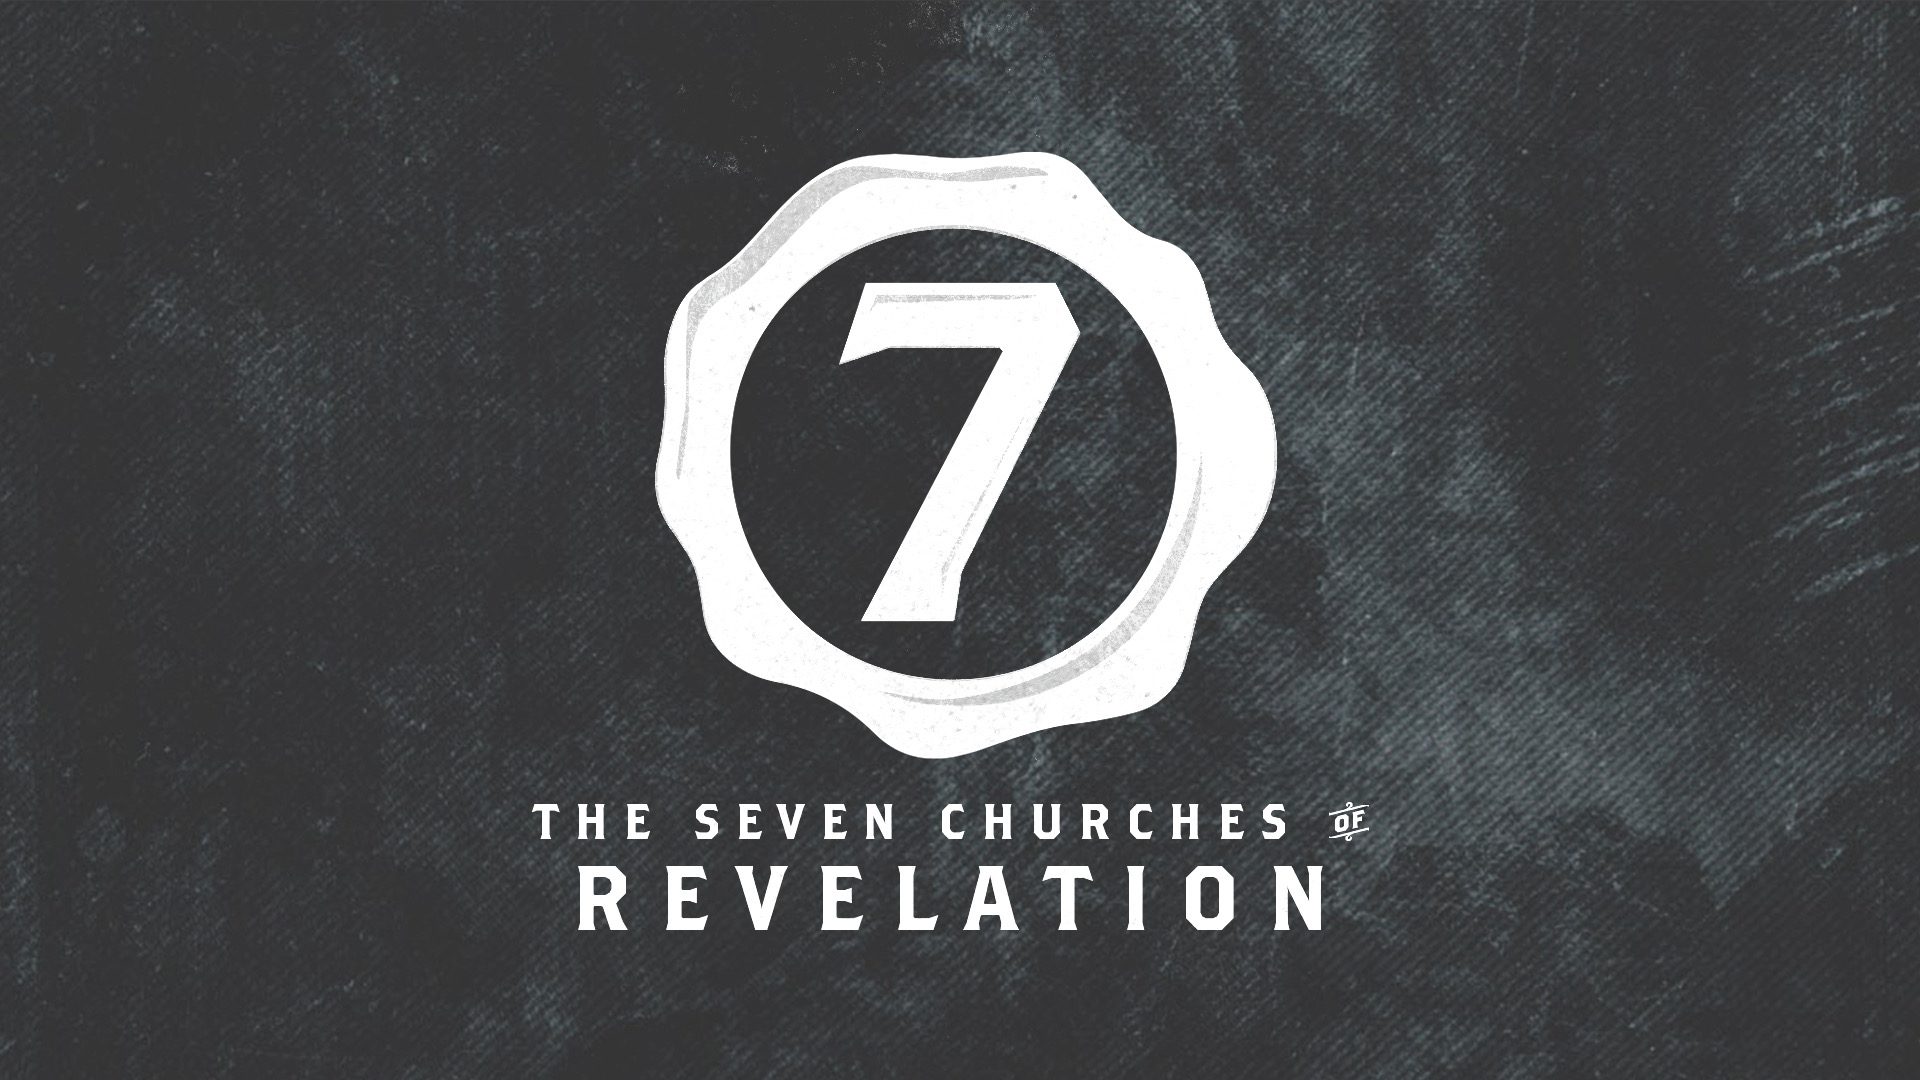 The Seven Churches of Revelation graphic